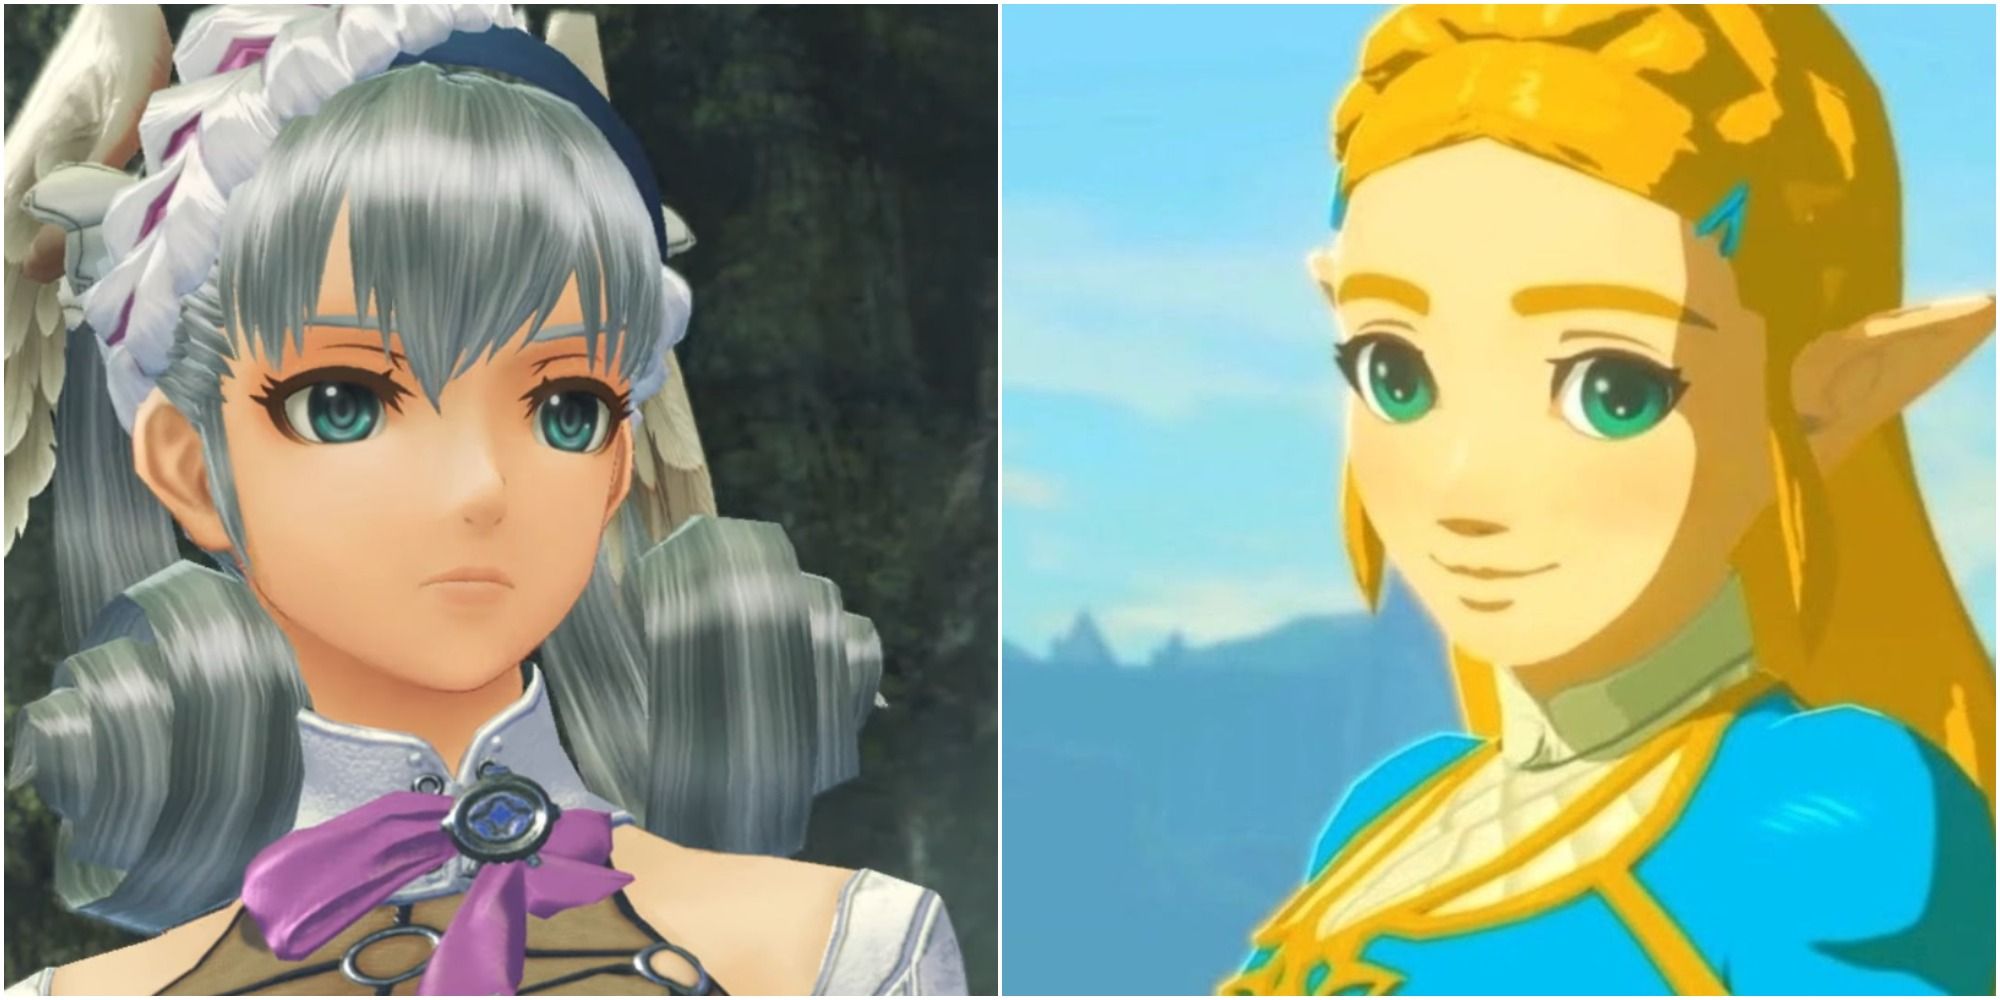 8 Similarities Between Xenoblade Chronicles and Breath Of The Wild